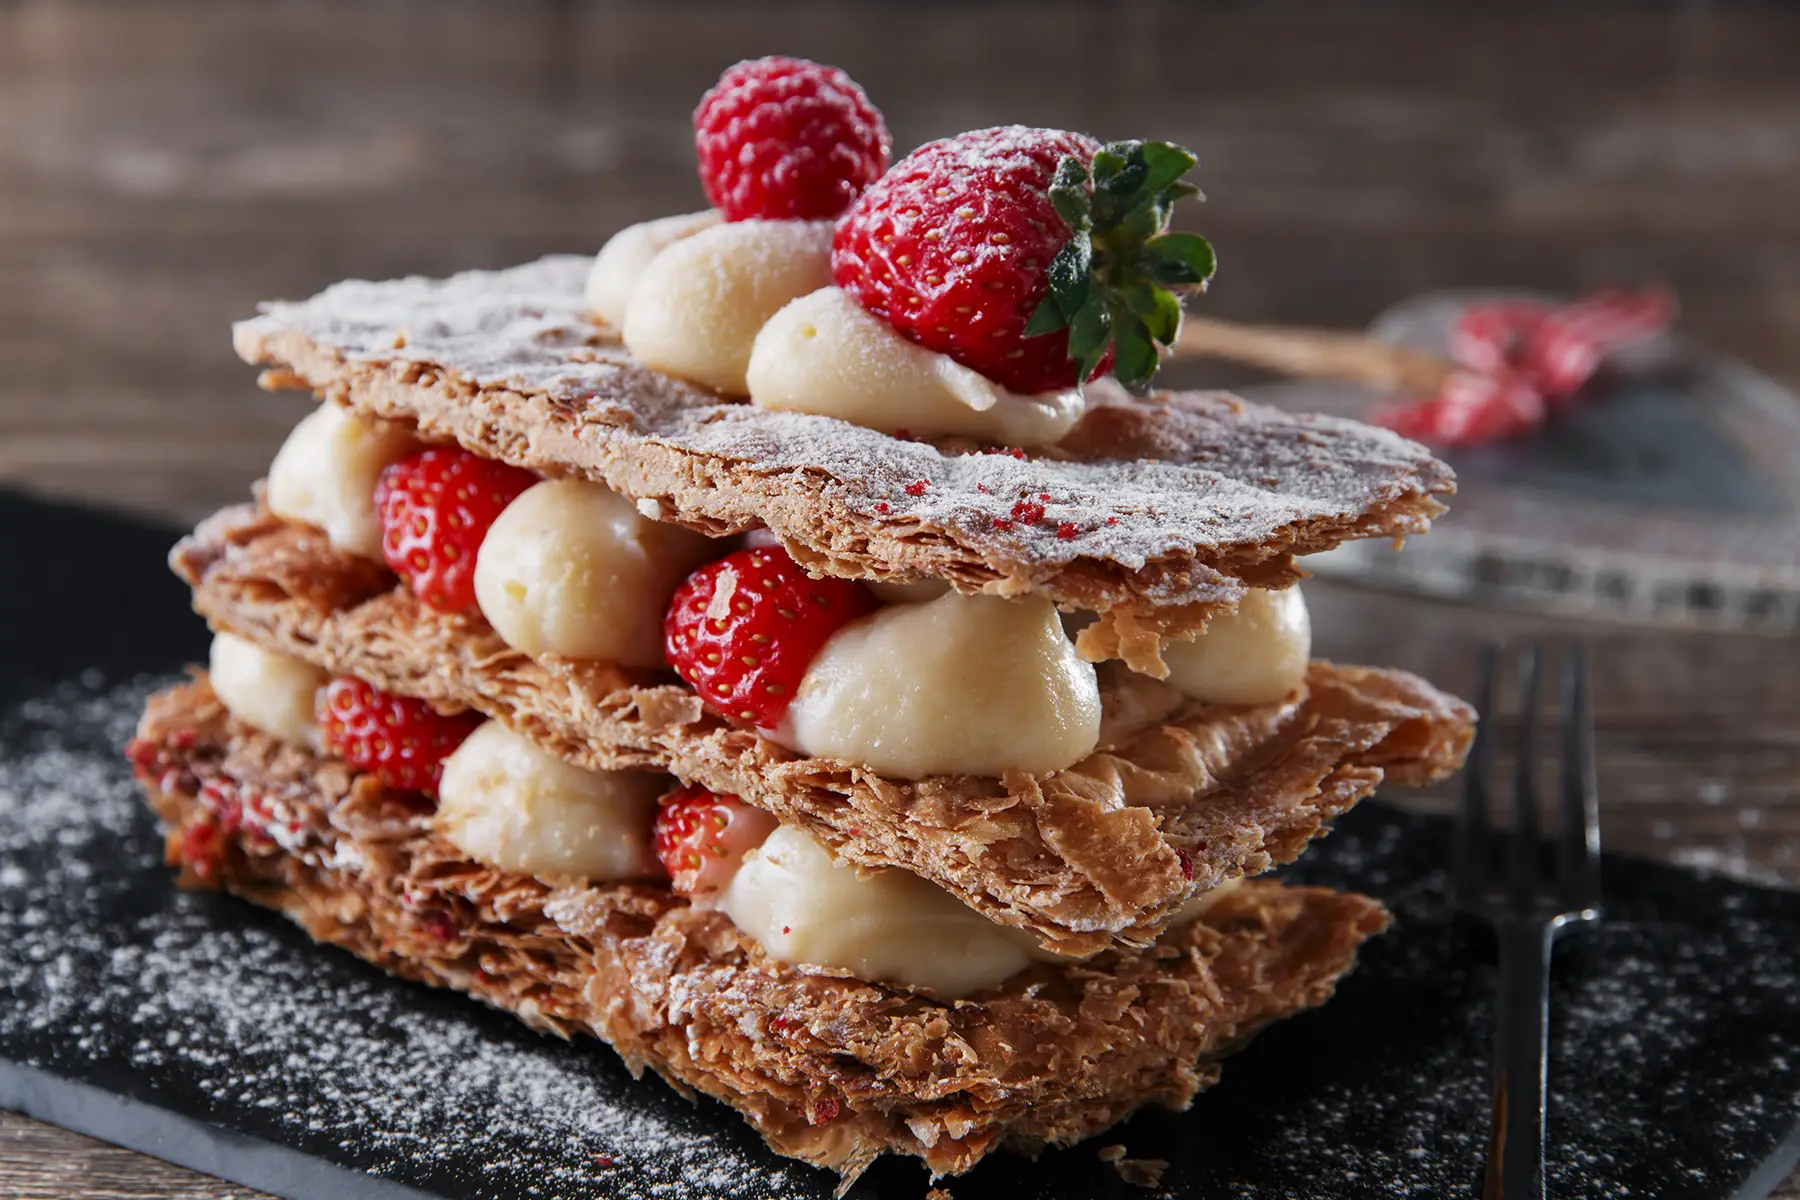 French cuisine: mille feuille